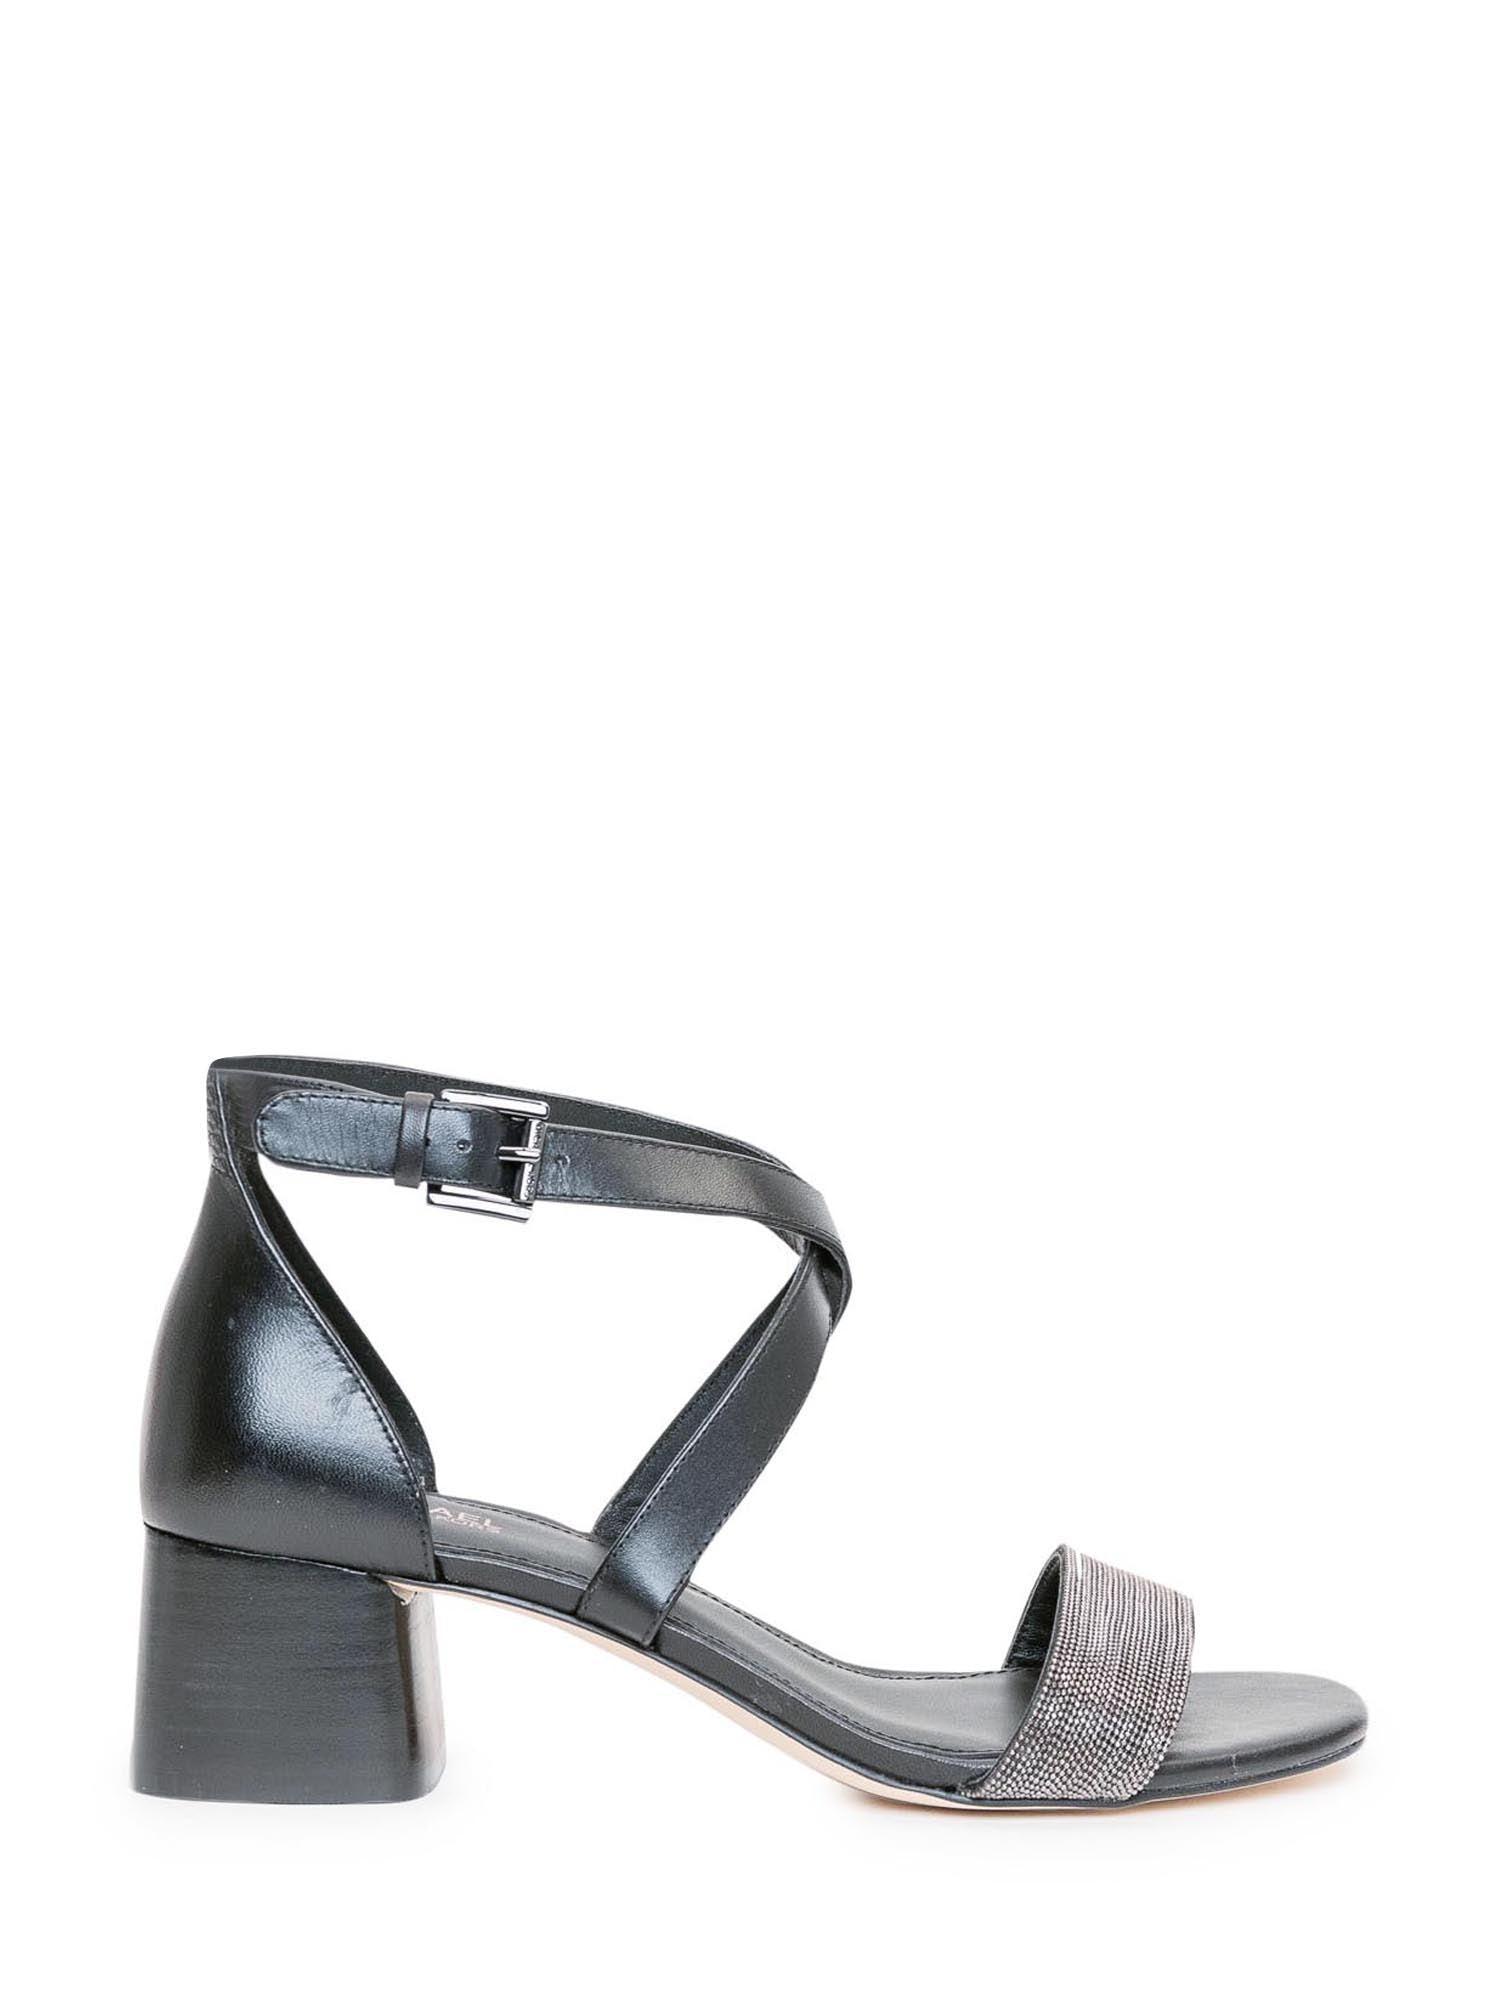 Max & Co. Diane Ankle Strap Sandals